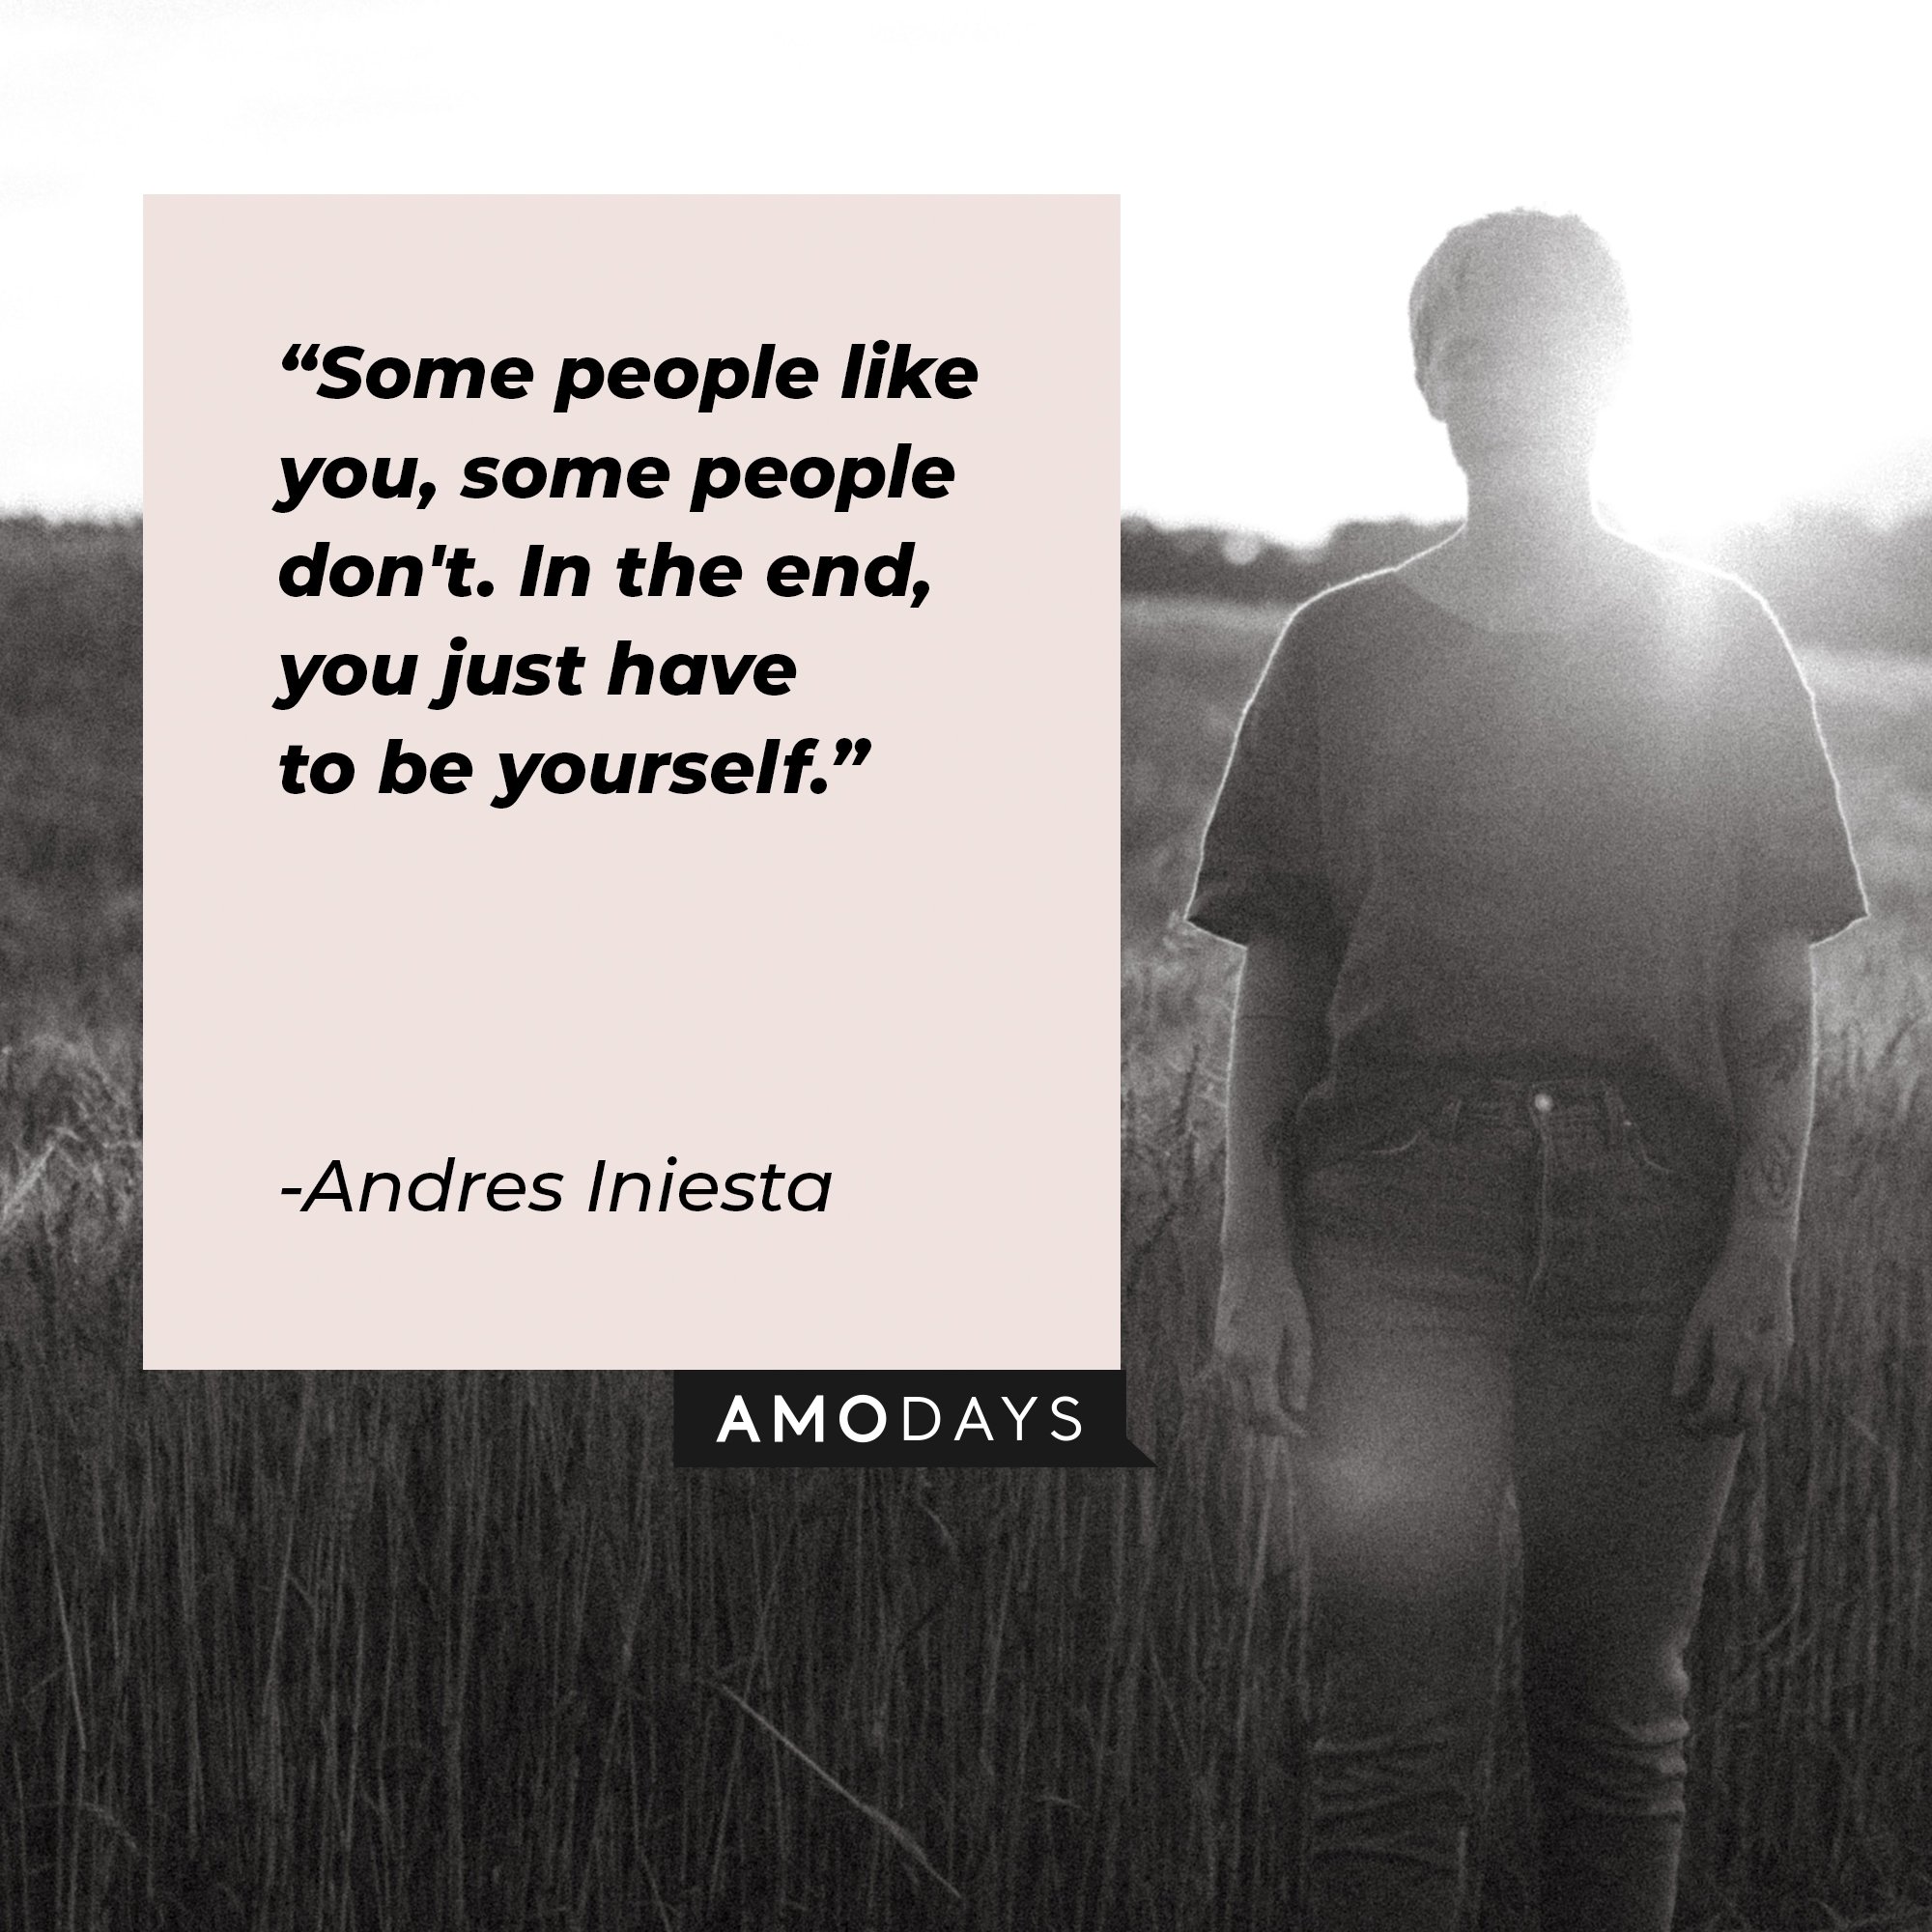 Andres Iniesta’s quote: "Some people like you, some people don't. In the end, you just have to be yourself." | Image: AmoDays